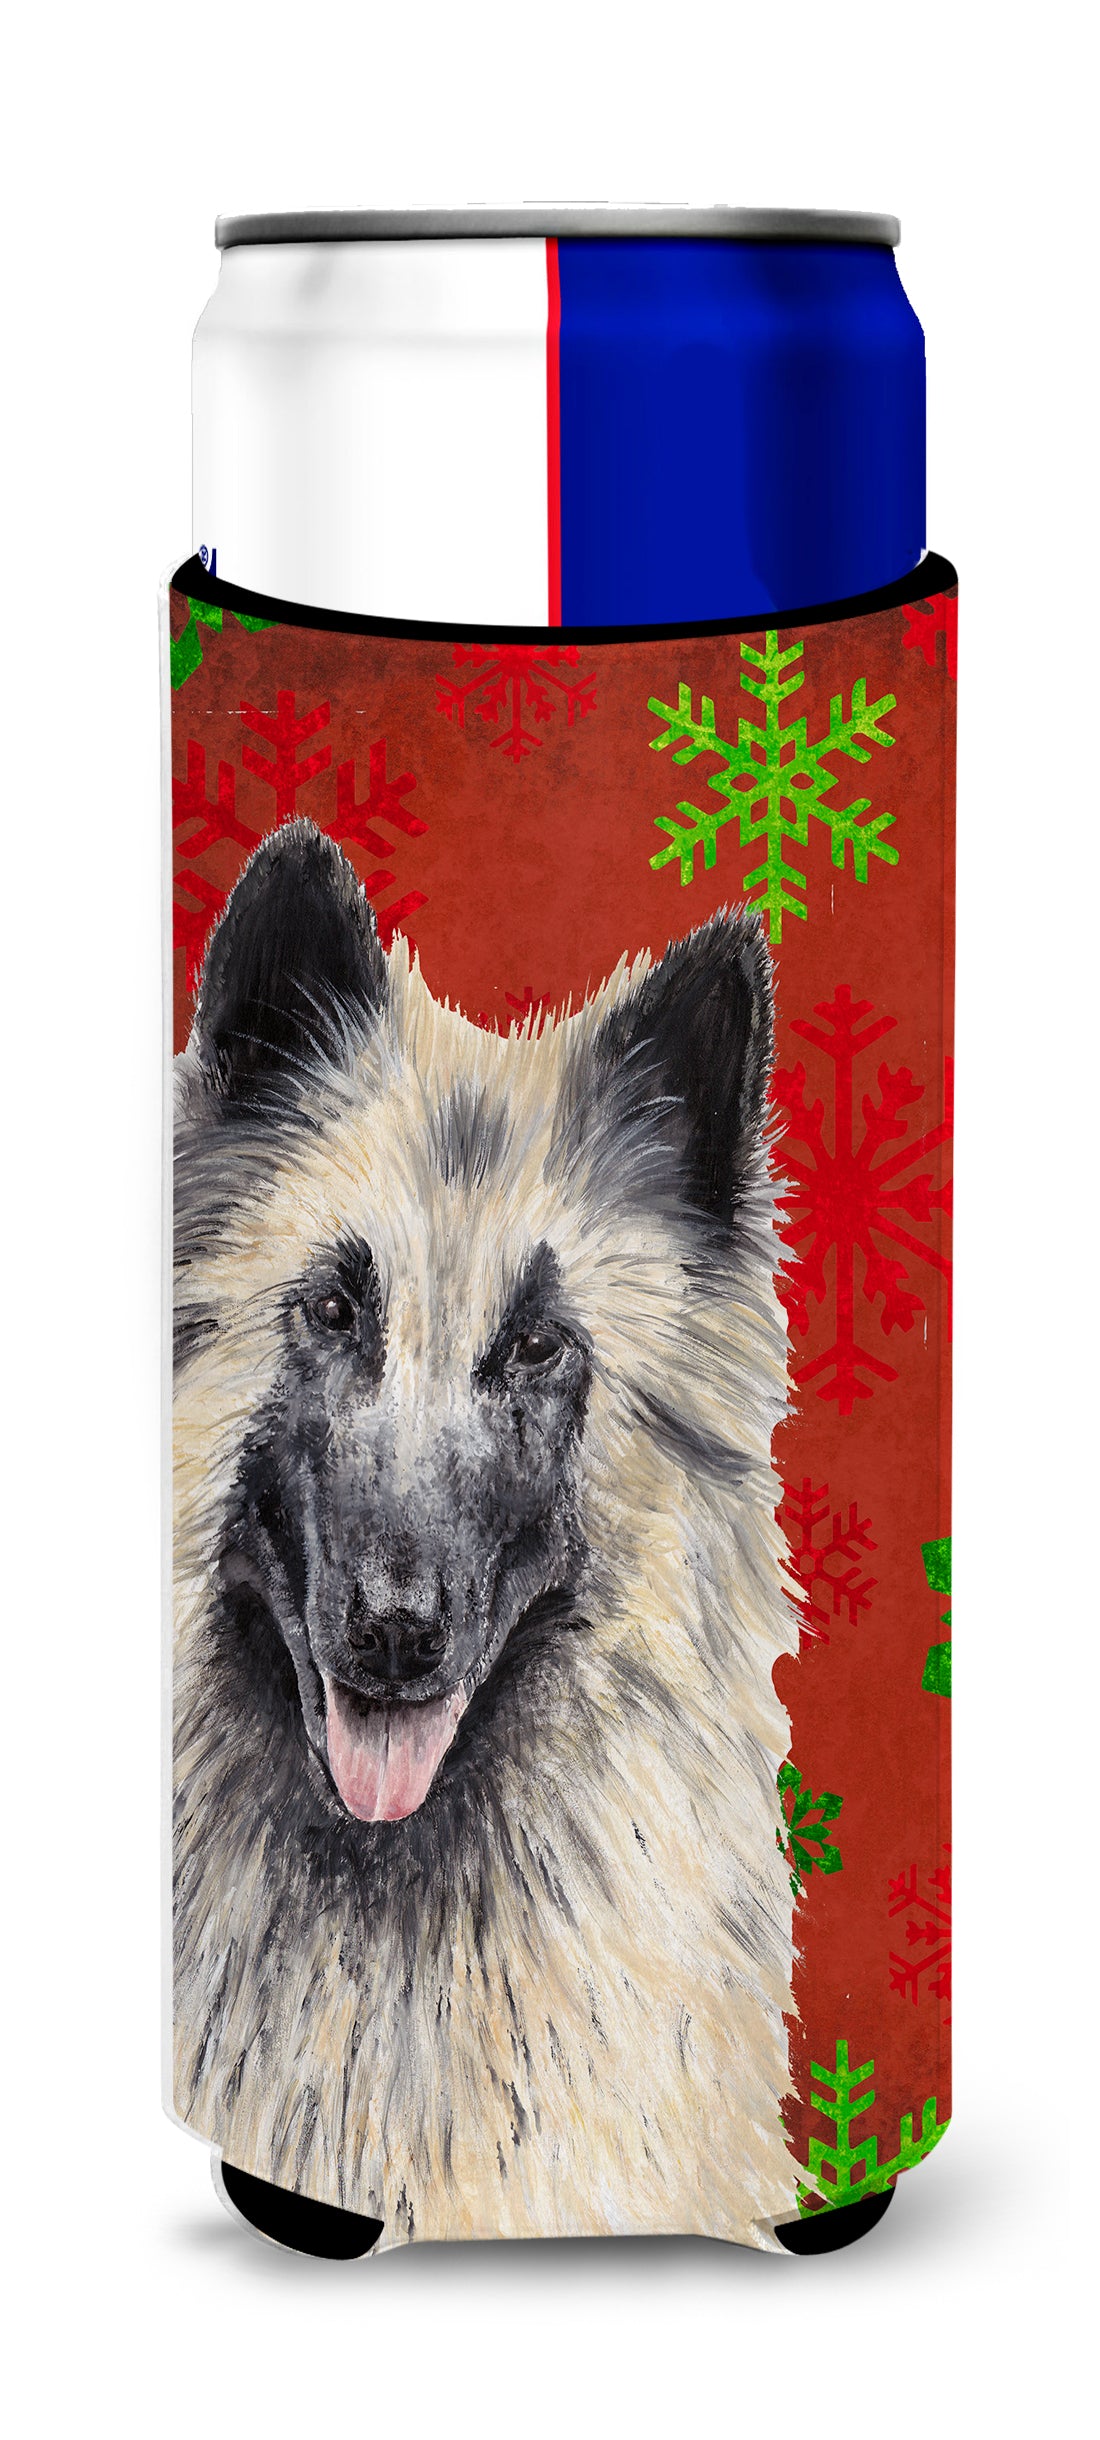 Belgian Tervuren Red and Green Snowflakes Holiday Christmas Ultra Beverage Insulators for slim cans SC9432MUK.